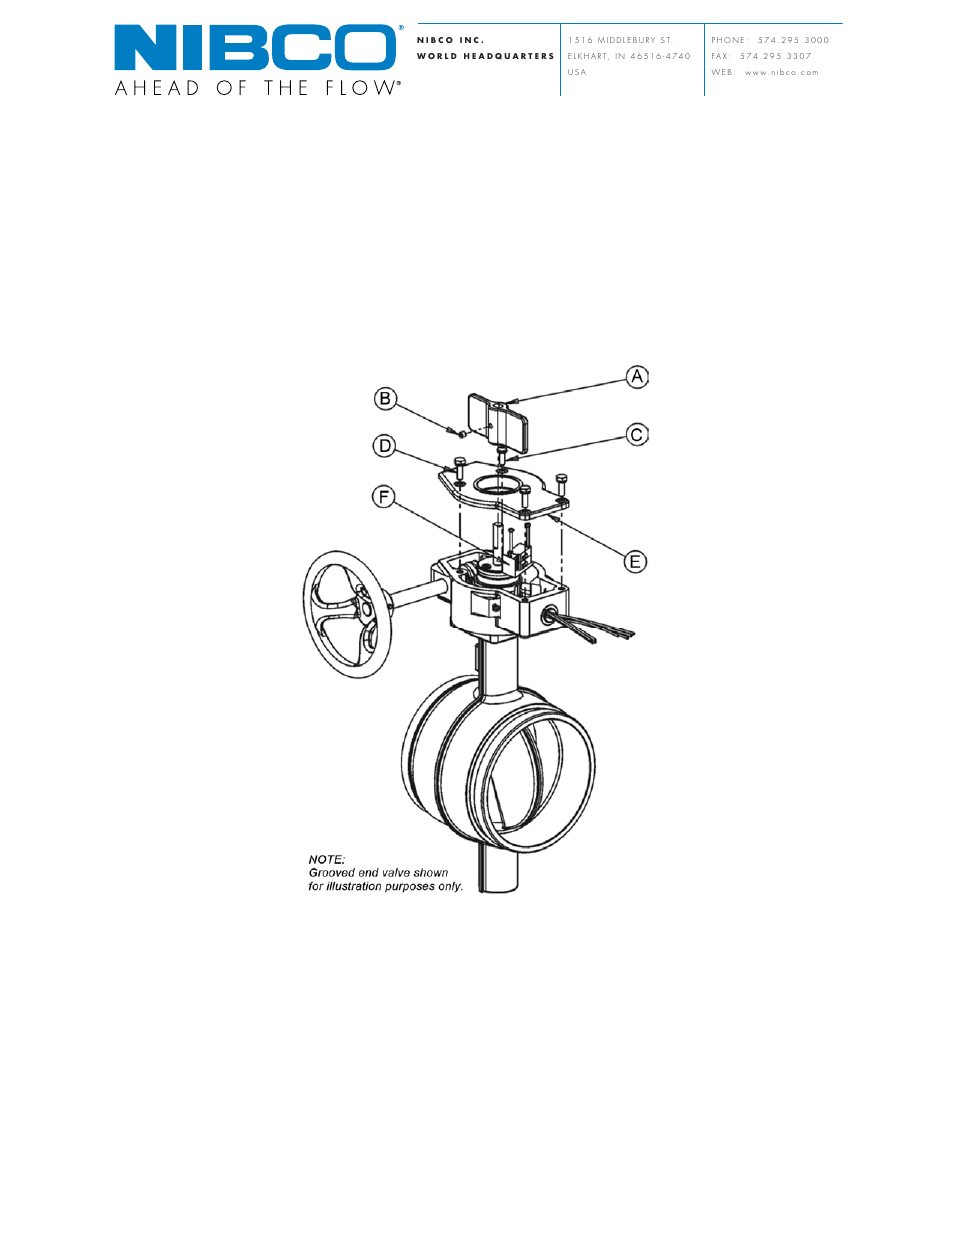 NIBCO TS-4 Replacement Supervisory Switches For Butterfly Valves User Manual | 2 pages